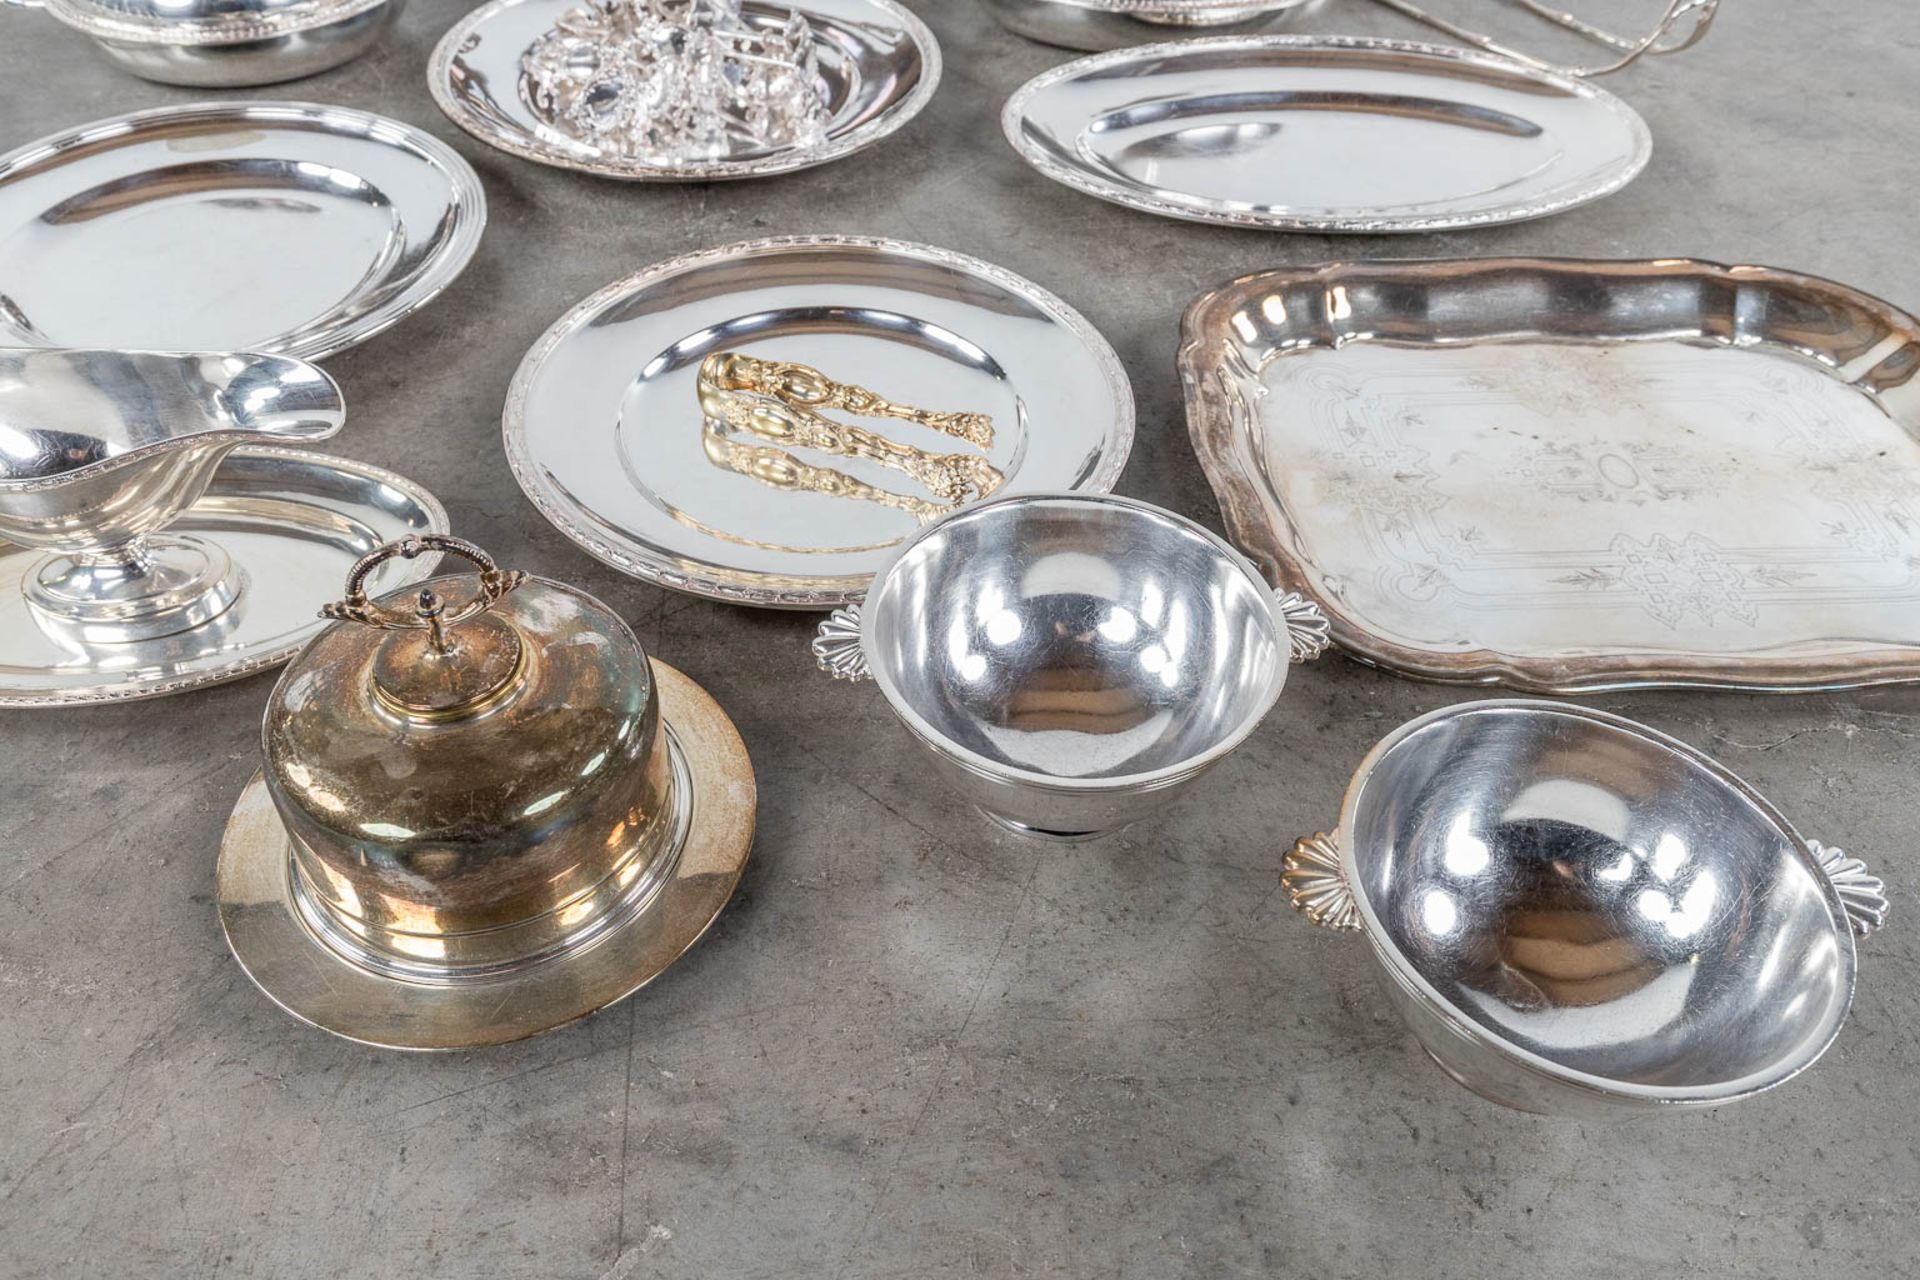 A large collection of table accessories and serving ware, silver-plated metal. (L: 32 x W: 48 cm) - Image 4 of 10